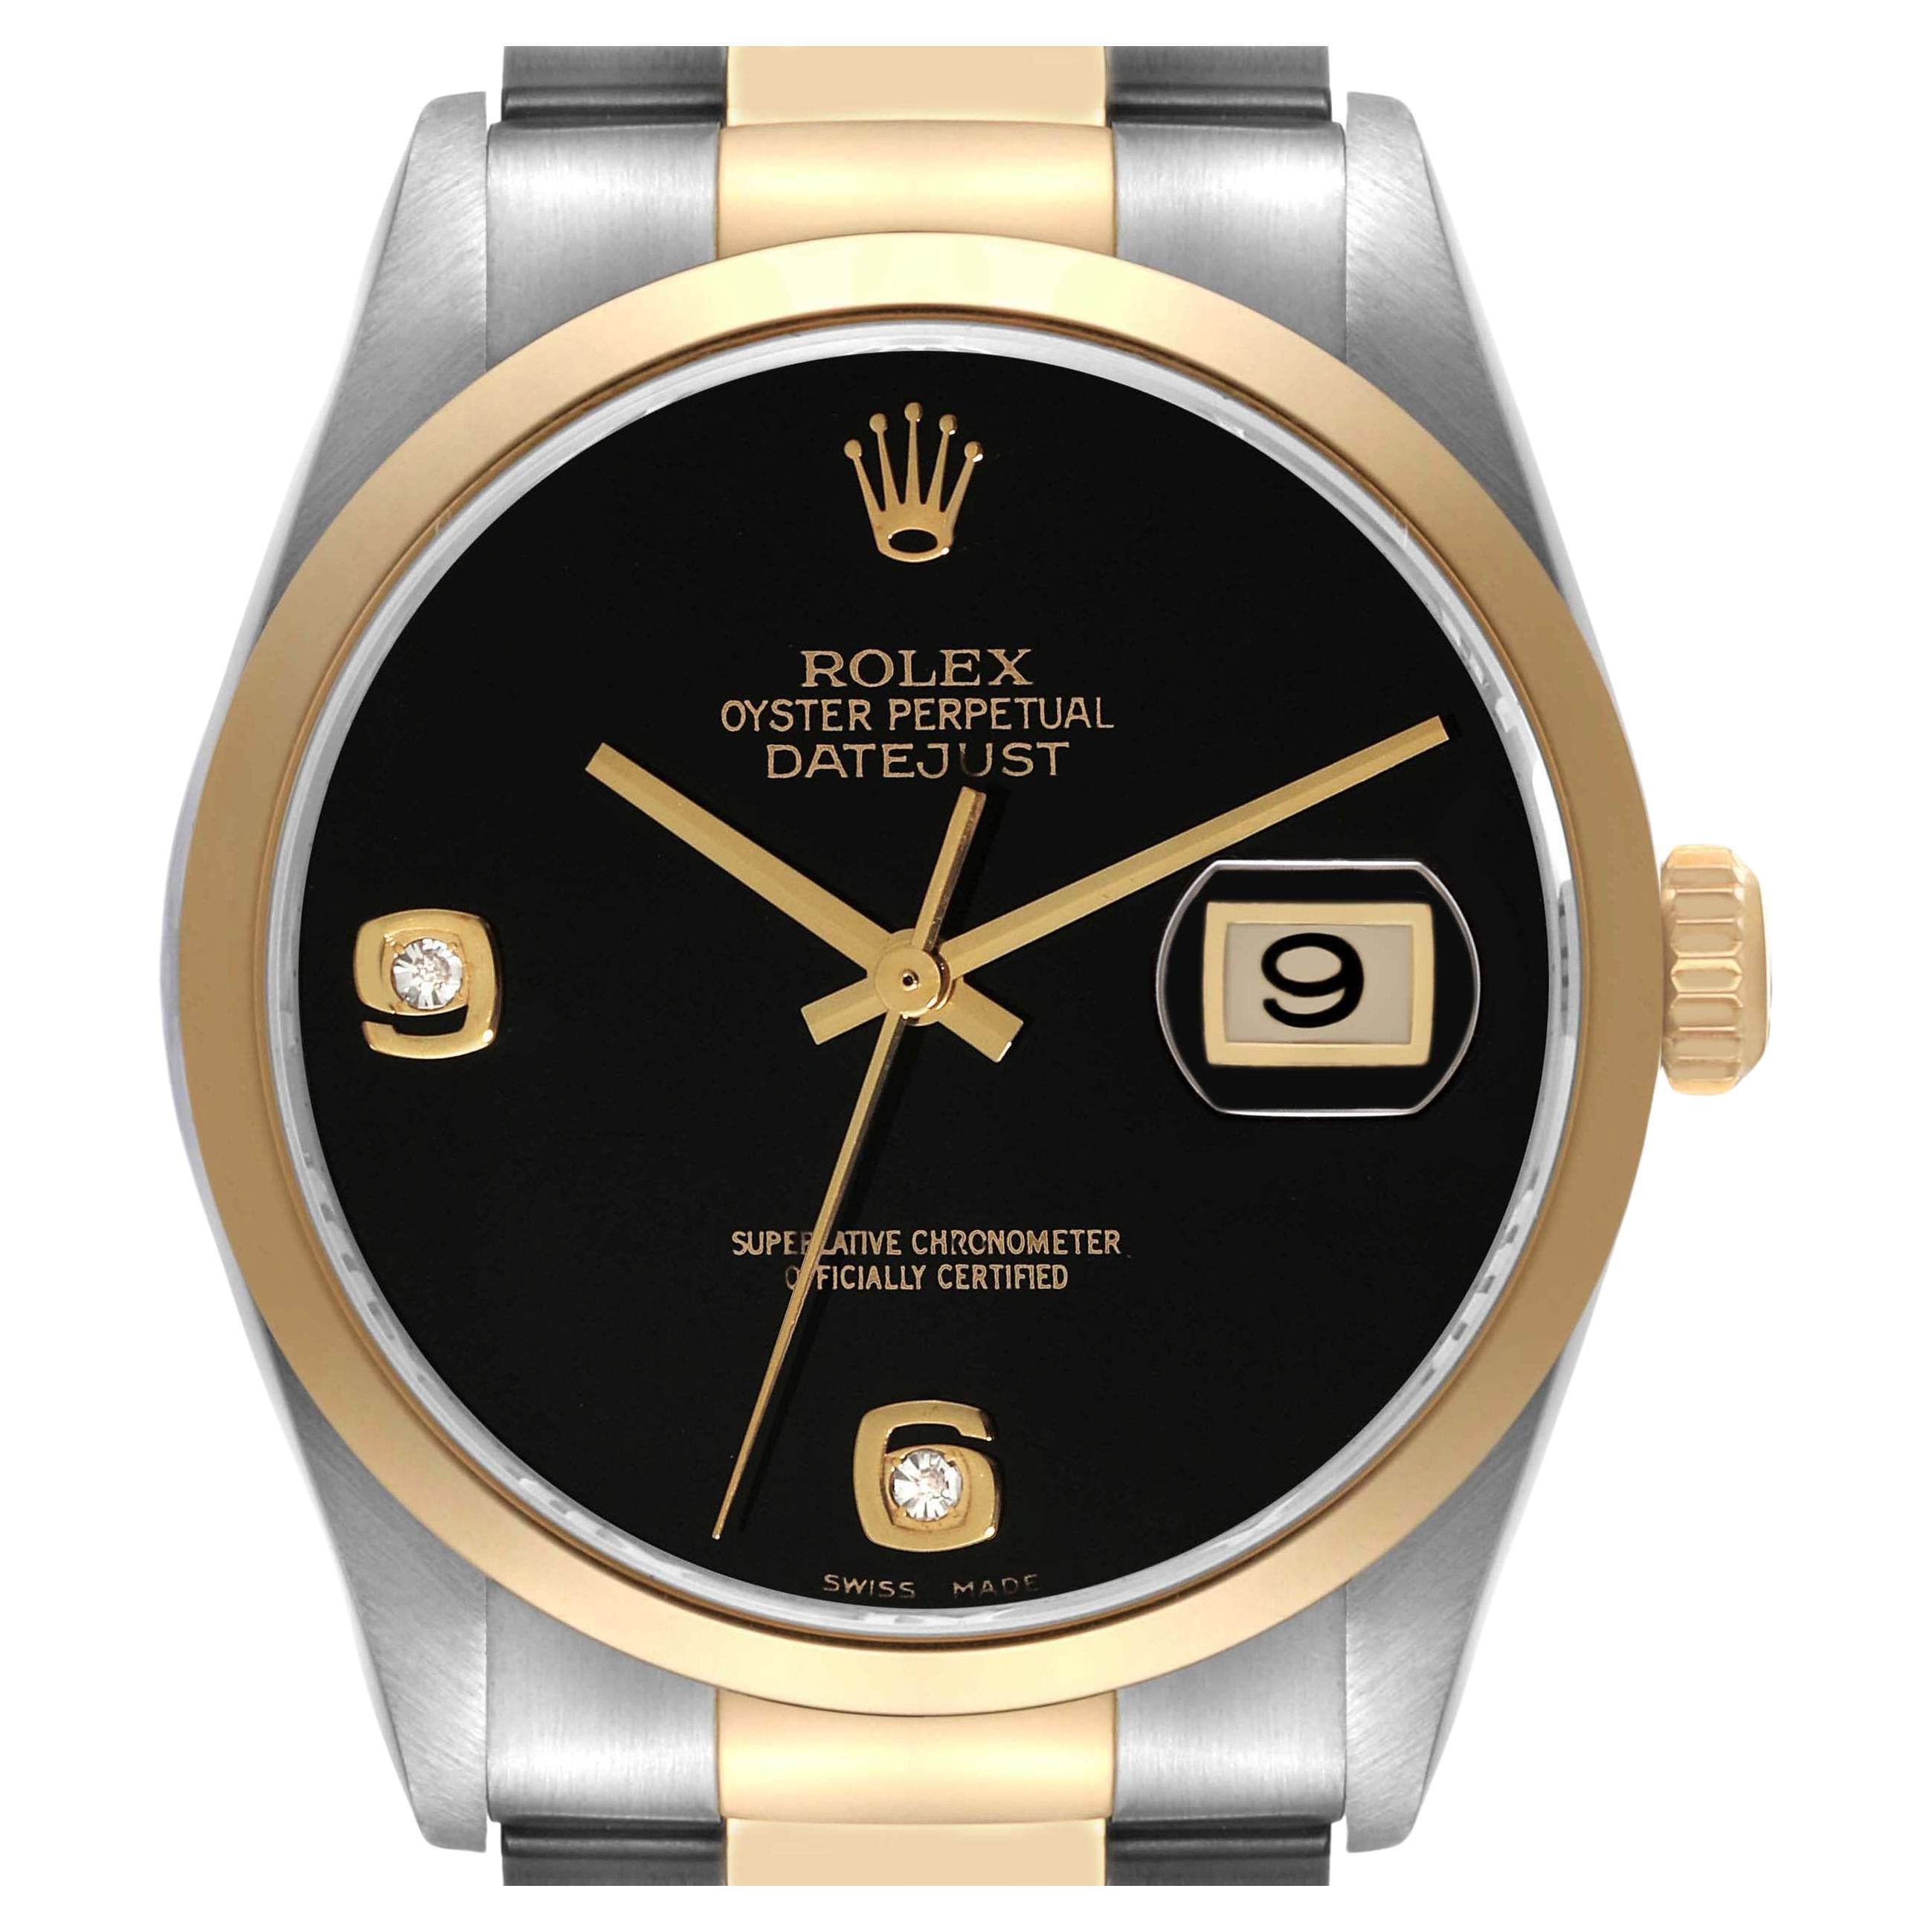 Rolex Datejust Steel Yellow Gold Onyx Diamond Dial Mens Watch 16203 Box Card For Sale